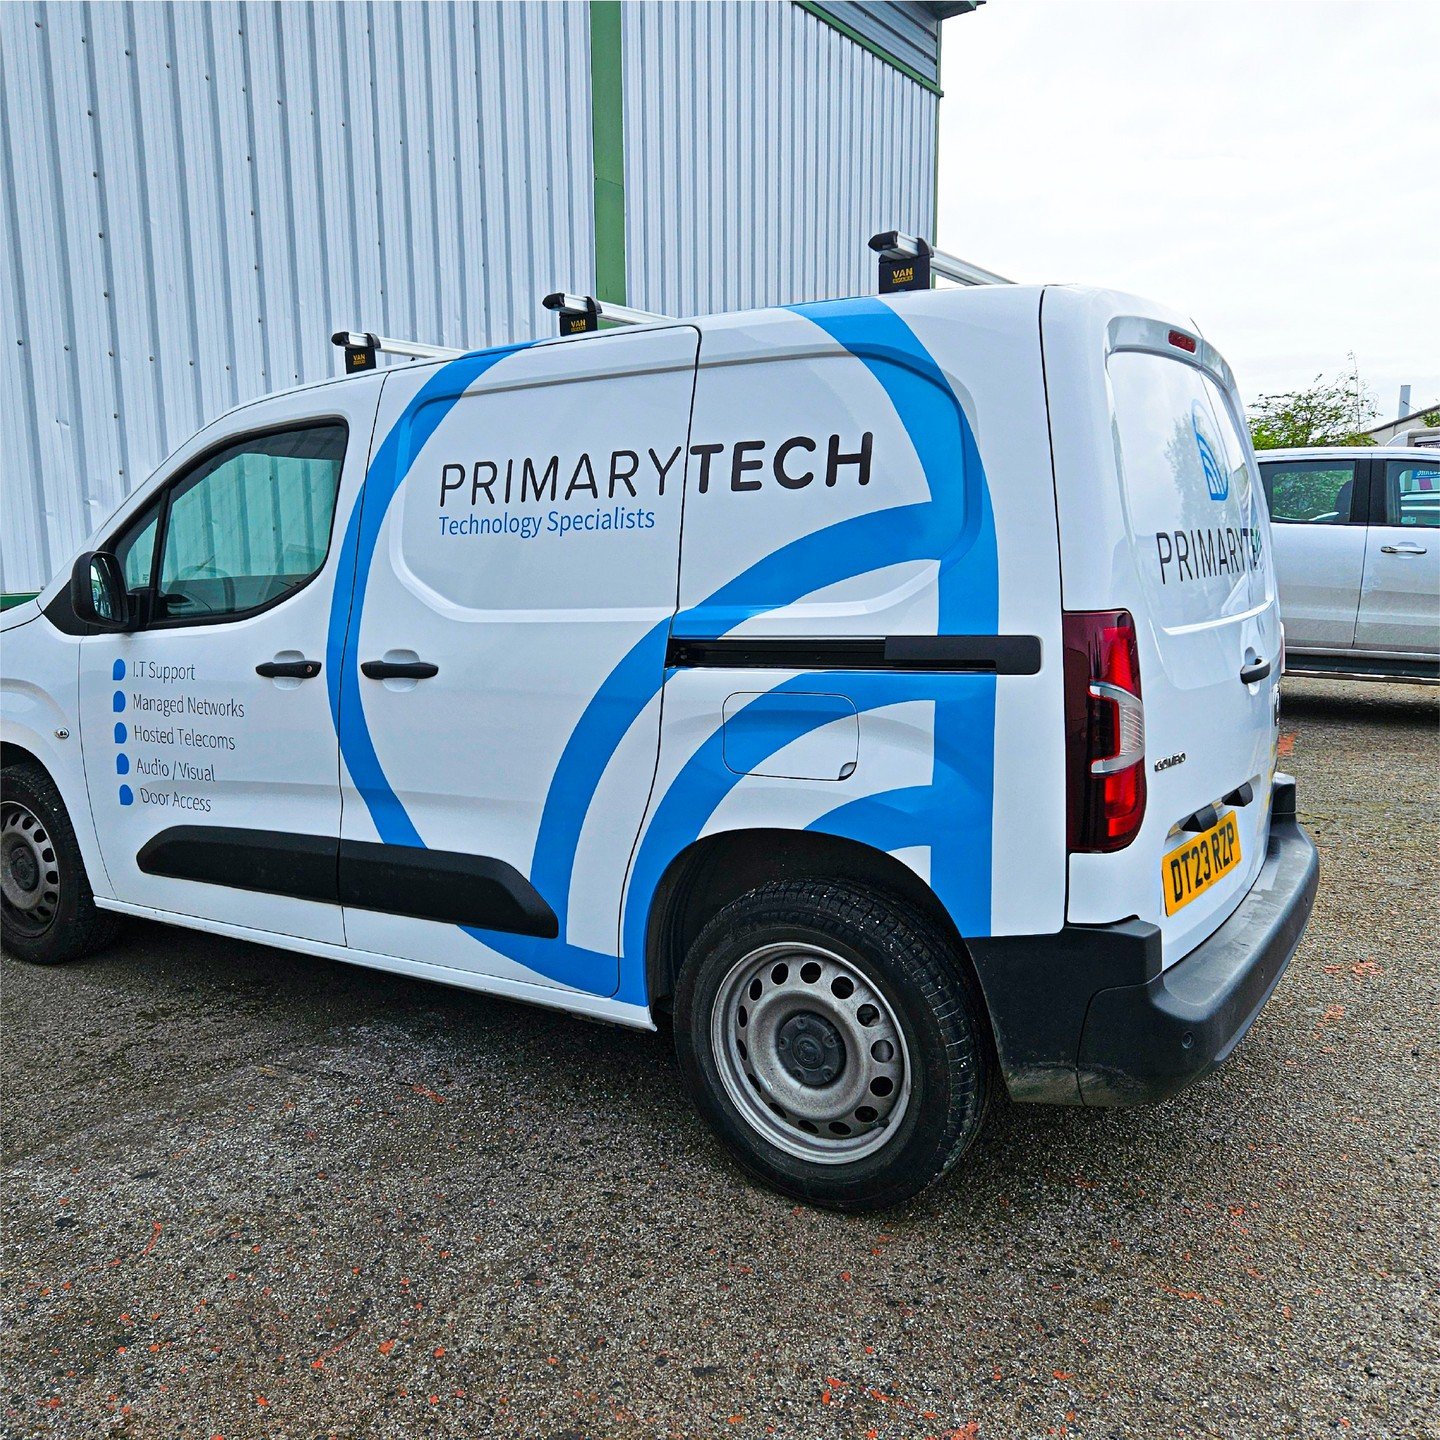 Another day, another wrap! 

This time we had the pleasure of designing and wrapping primarytech_ltd latest van! 😍